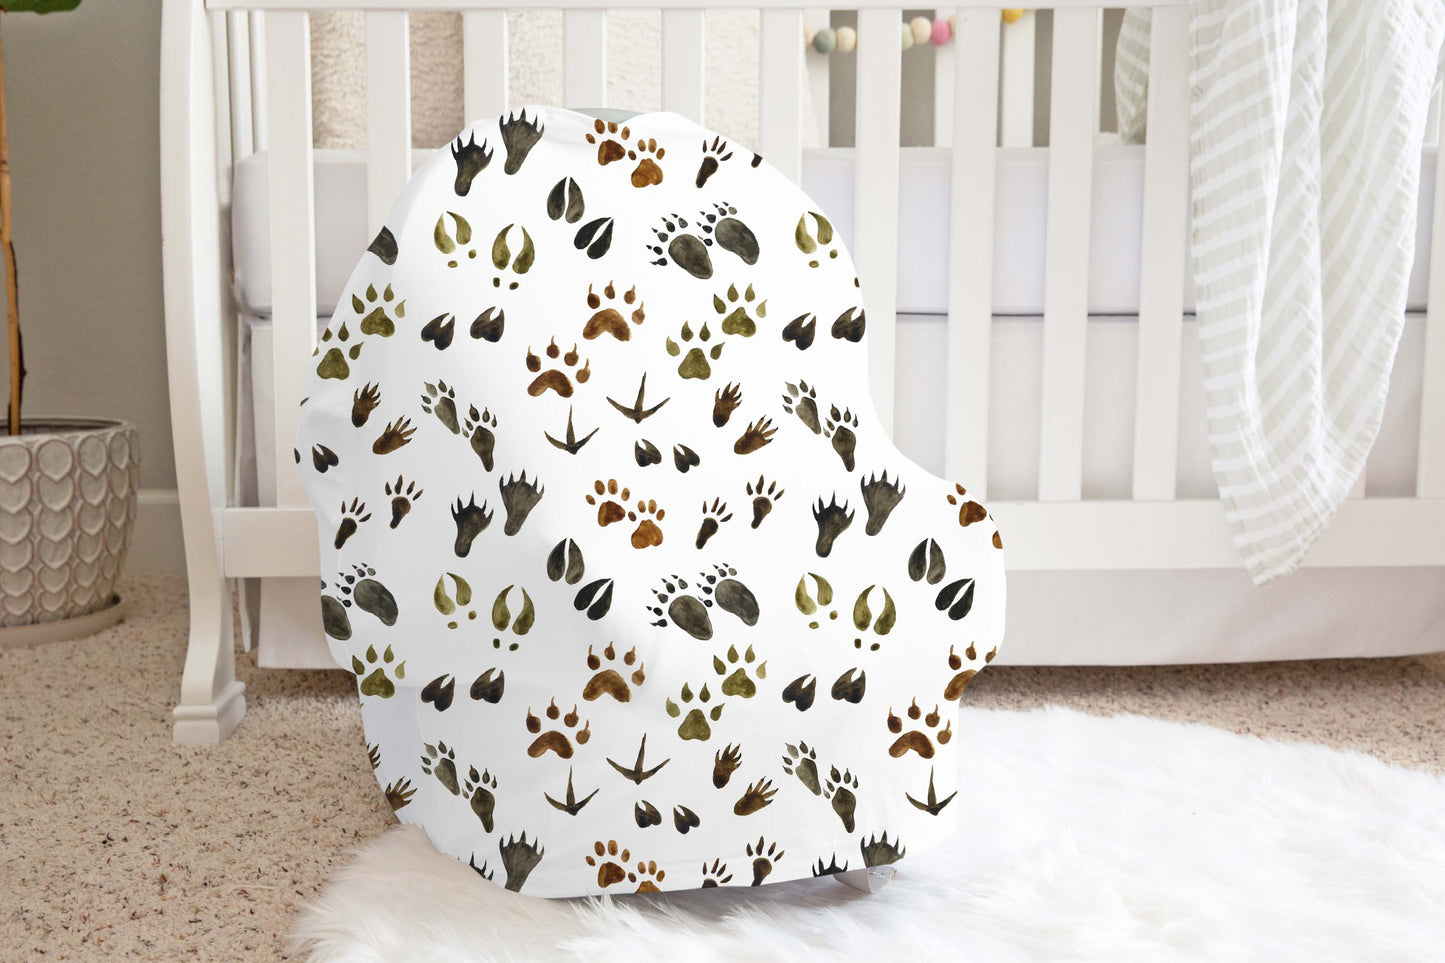 Animal tracks Car Seat Cover, Woodland Nursing cover up - Footprints in the forest